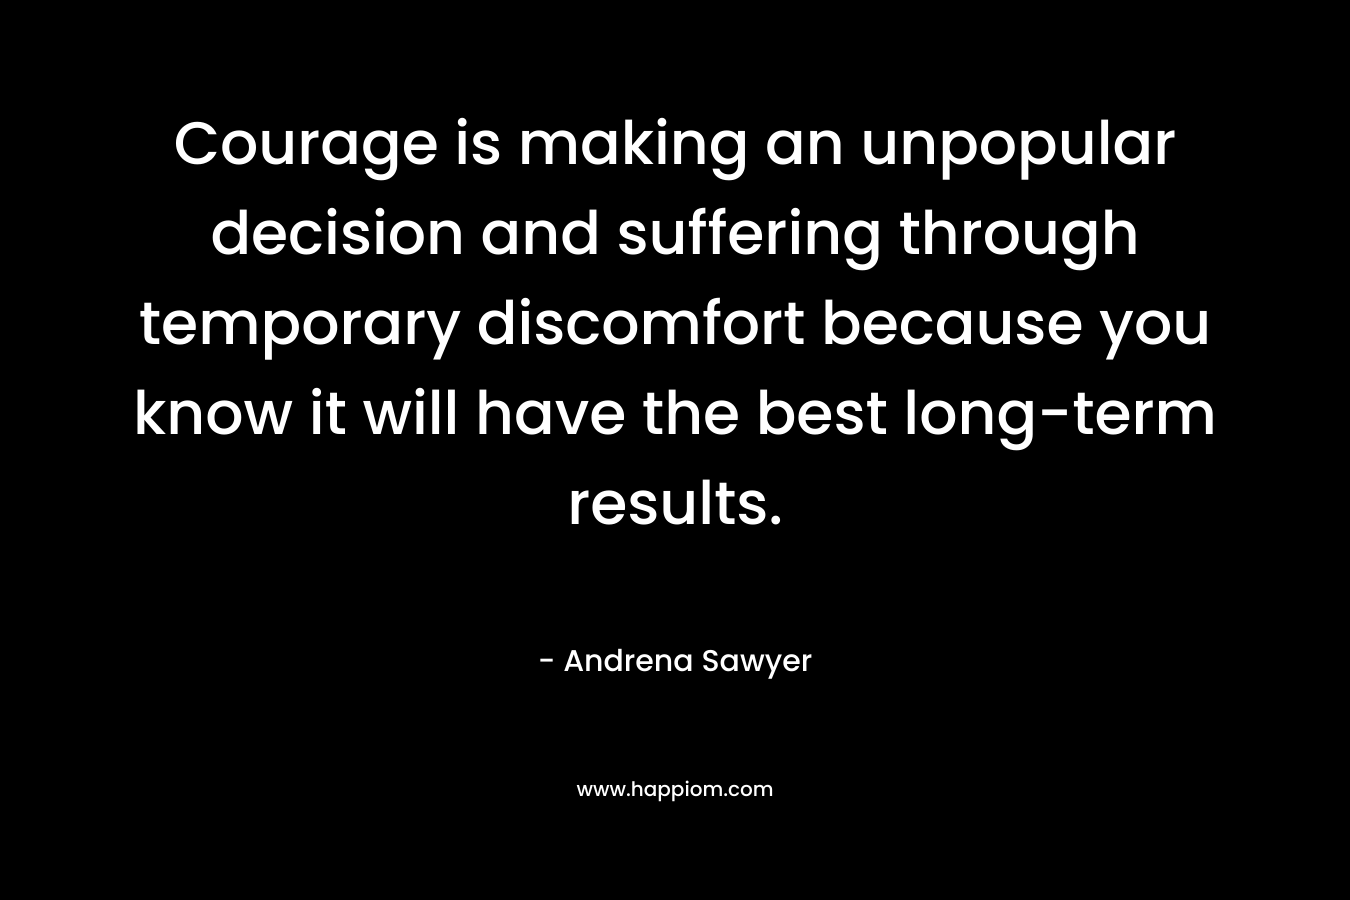 Courage is making an unpopular decision and suffering through temporary discomfort because you know it will have the best long-term results. – Andrena Sawyer